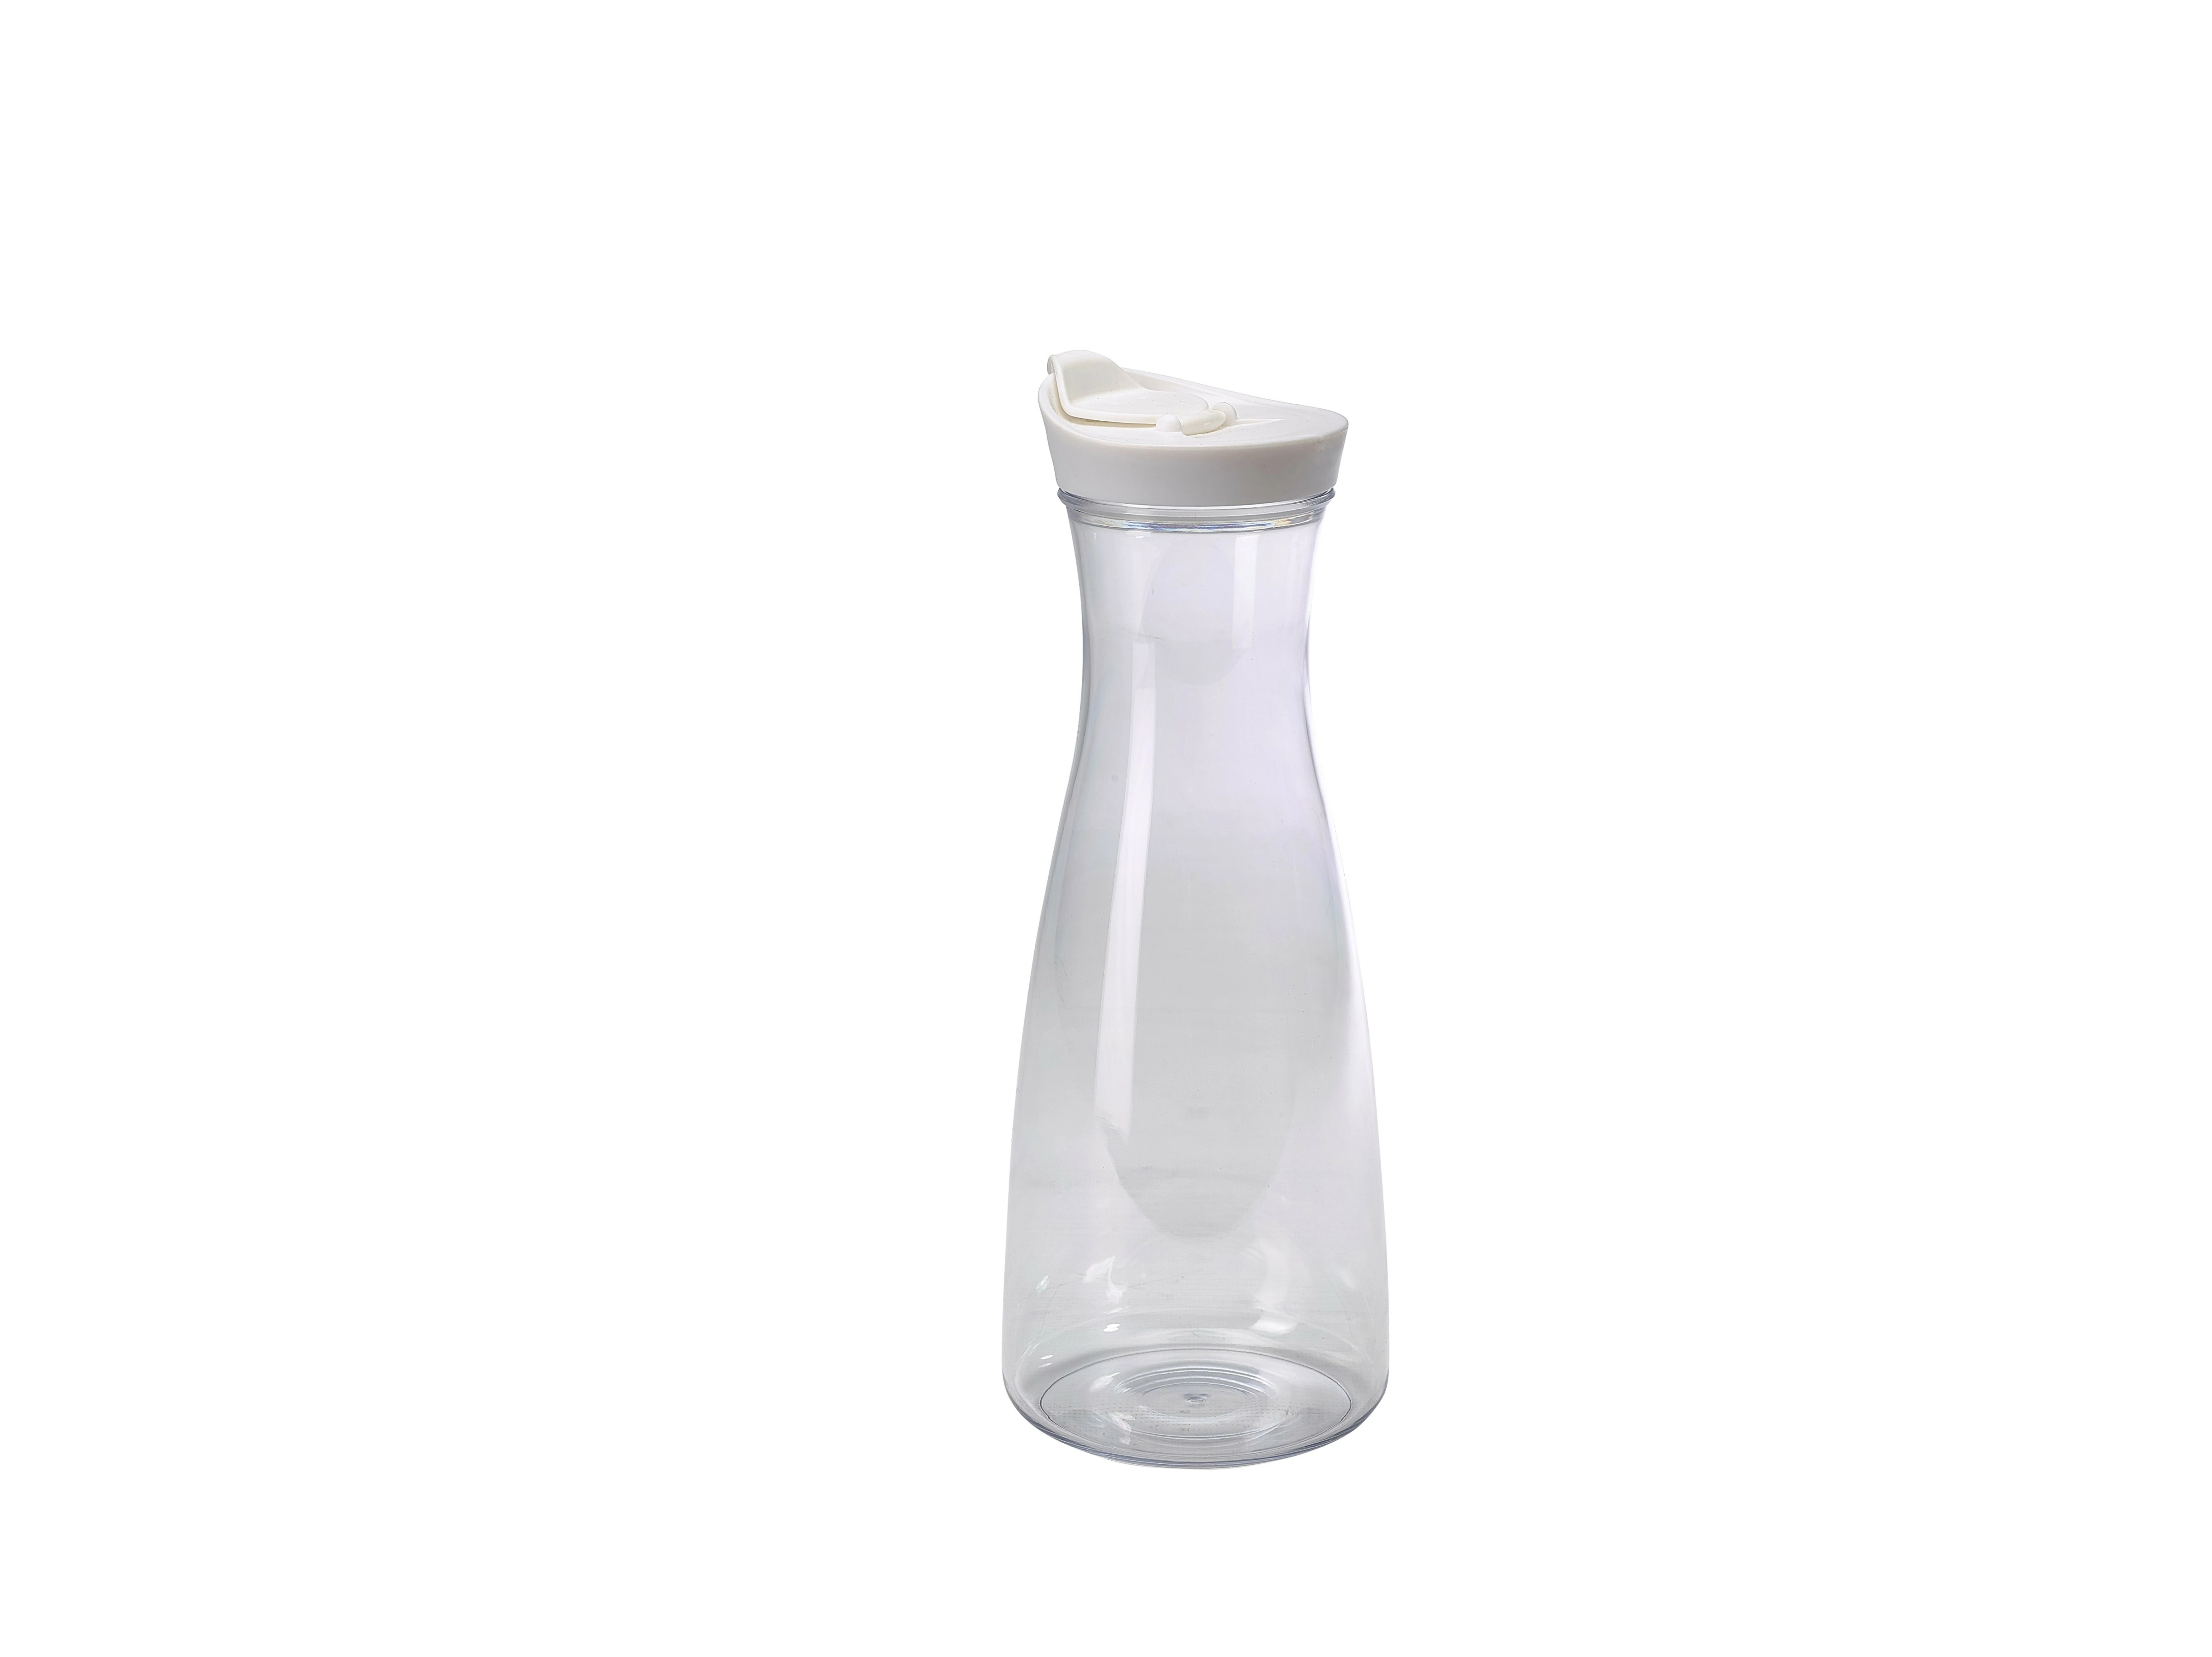 GenWare Polycarbonate Carafe With Lid 1L/35.2oz